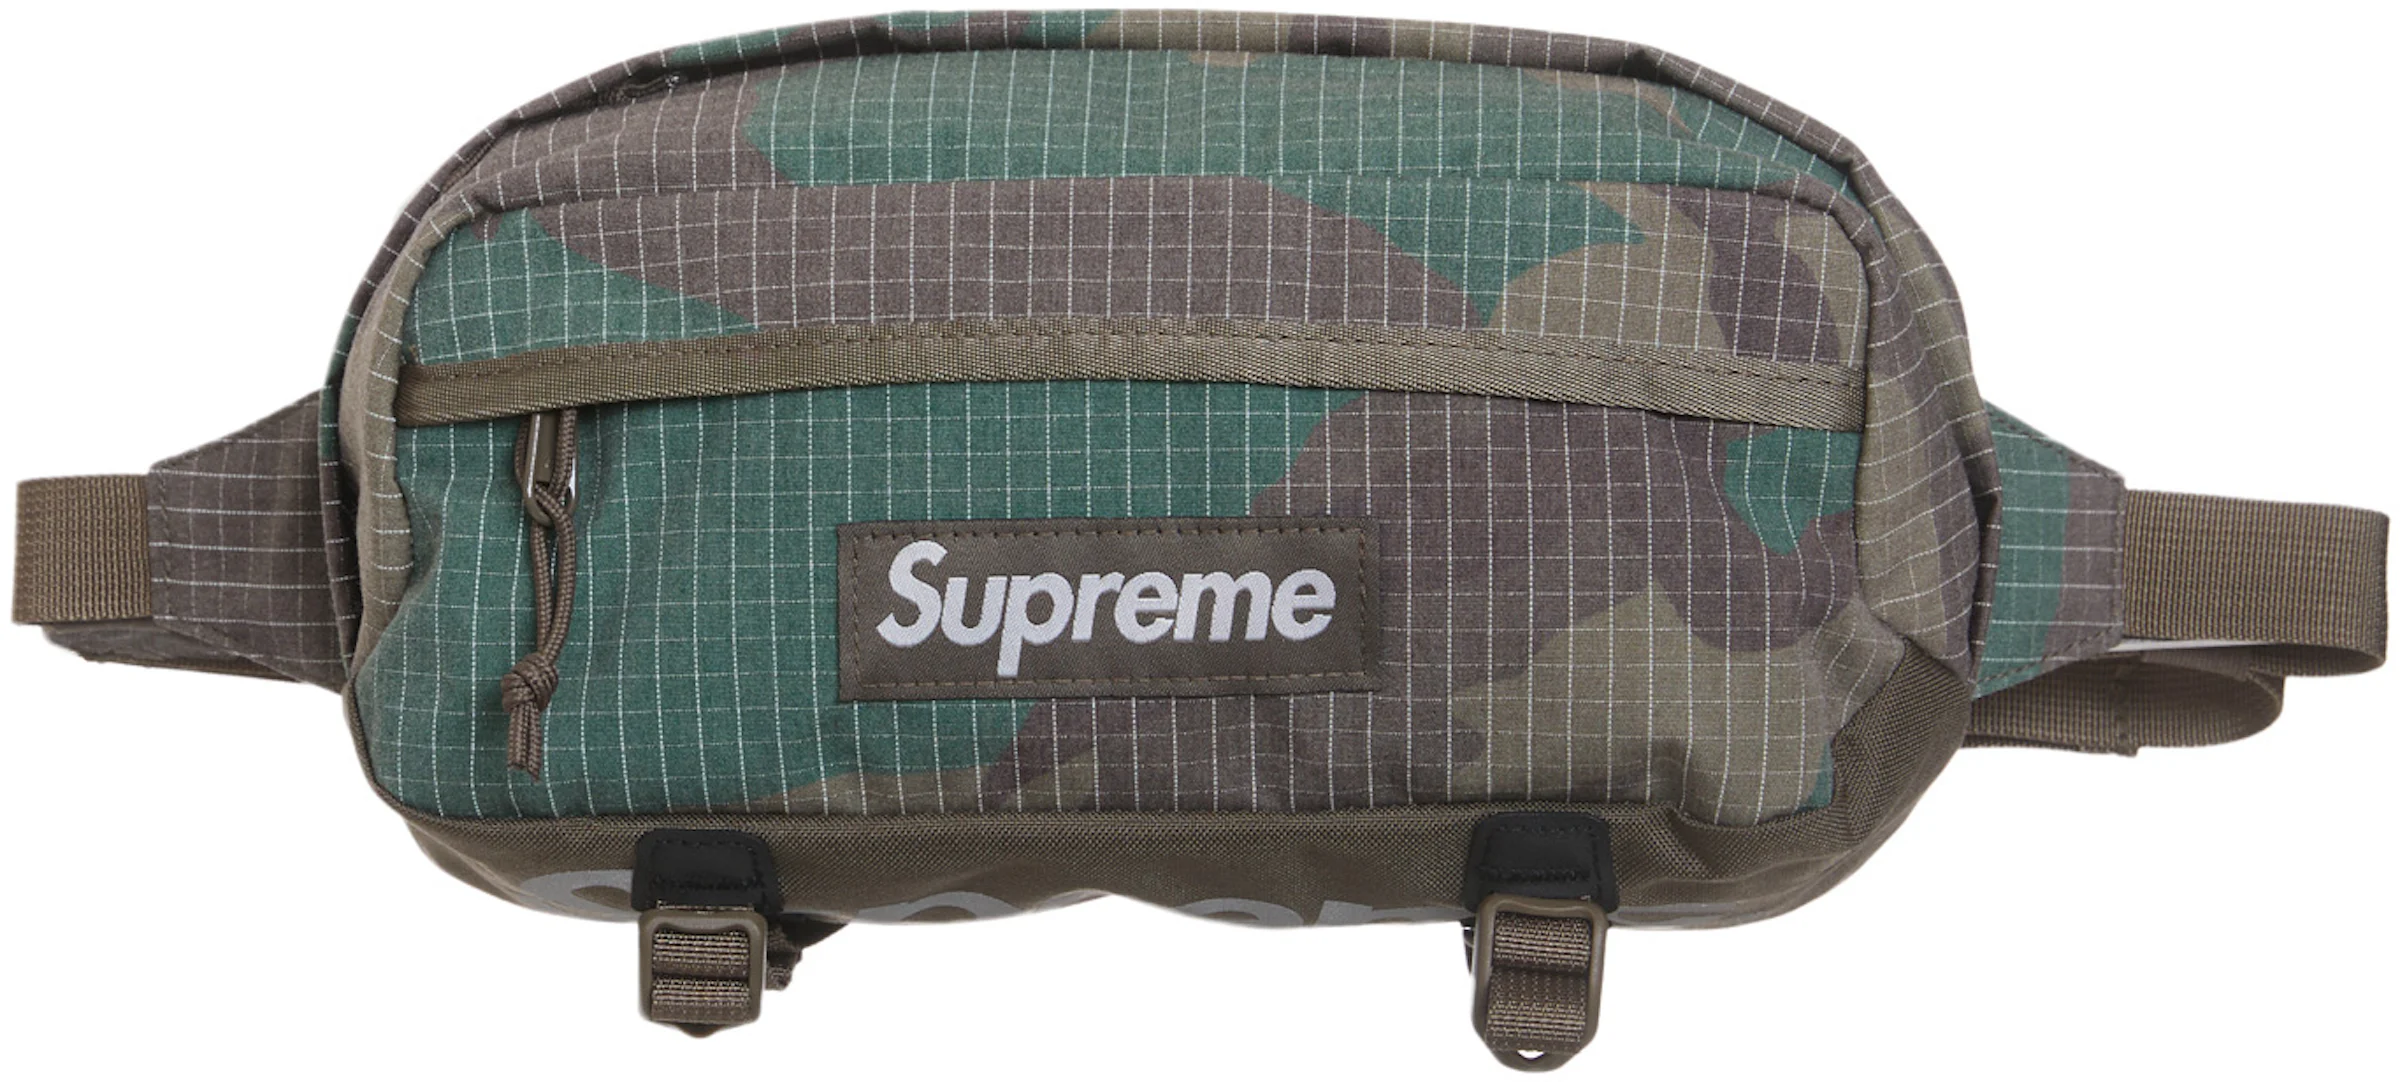 Men Women Supreme Camo Bag Waist Carry Fanny Pack with Can Holder